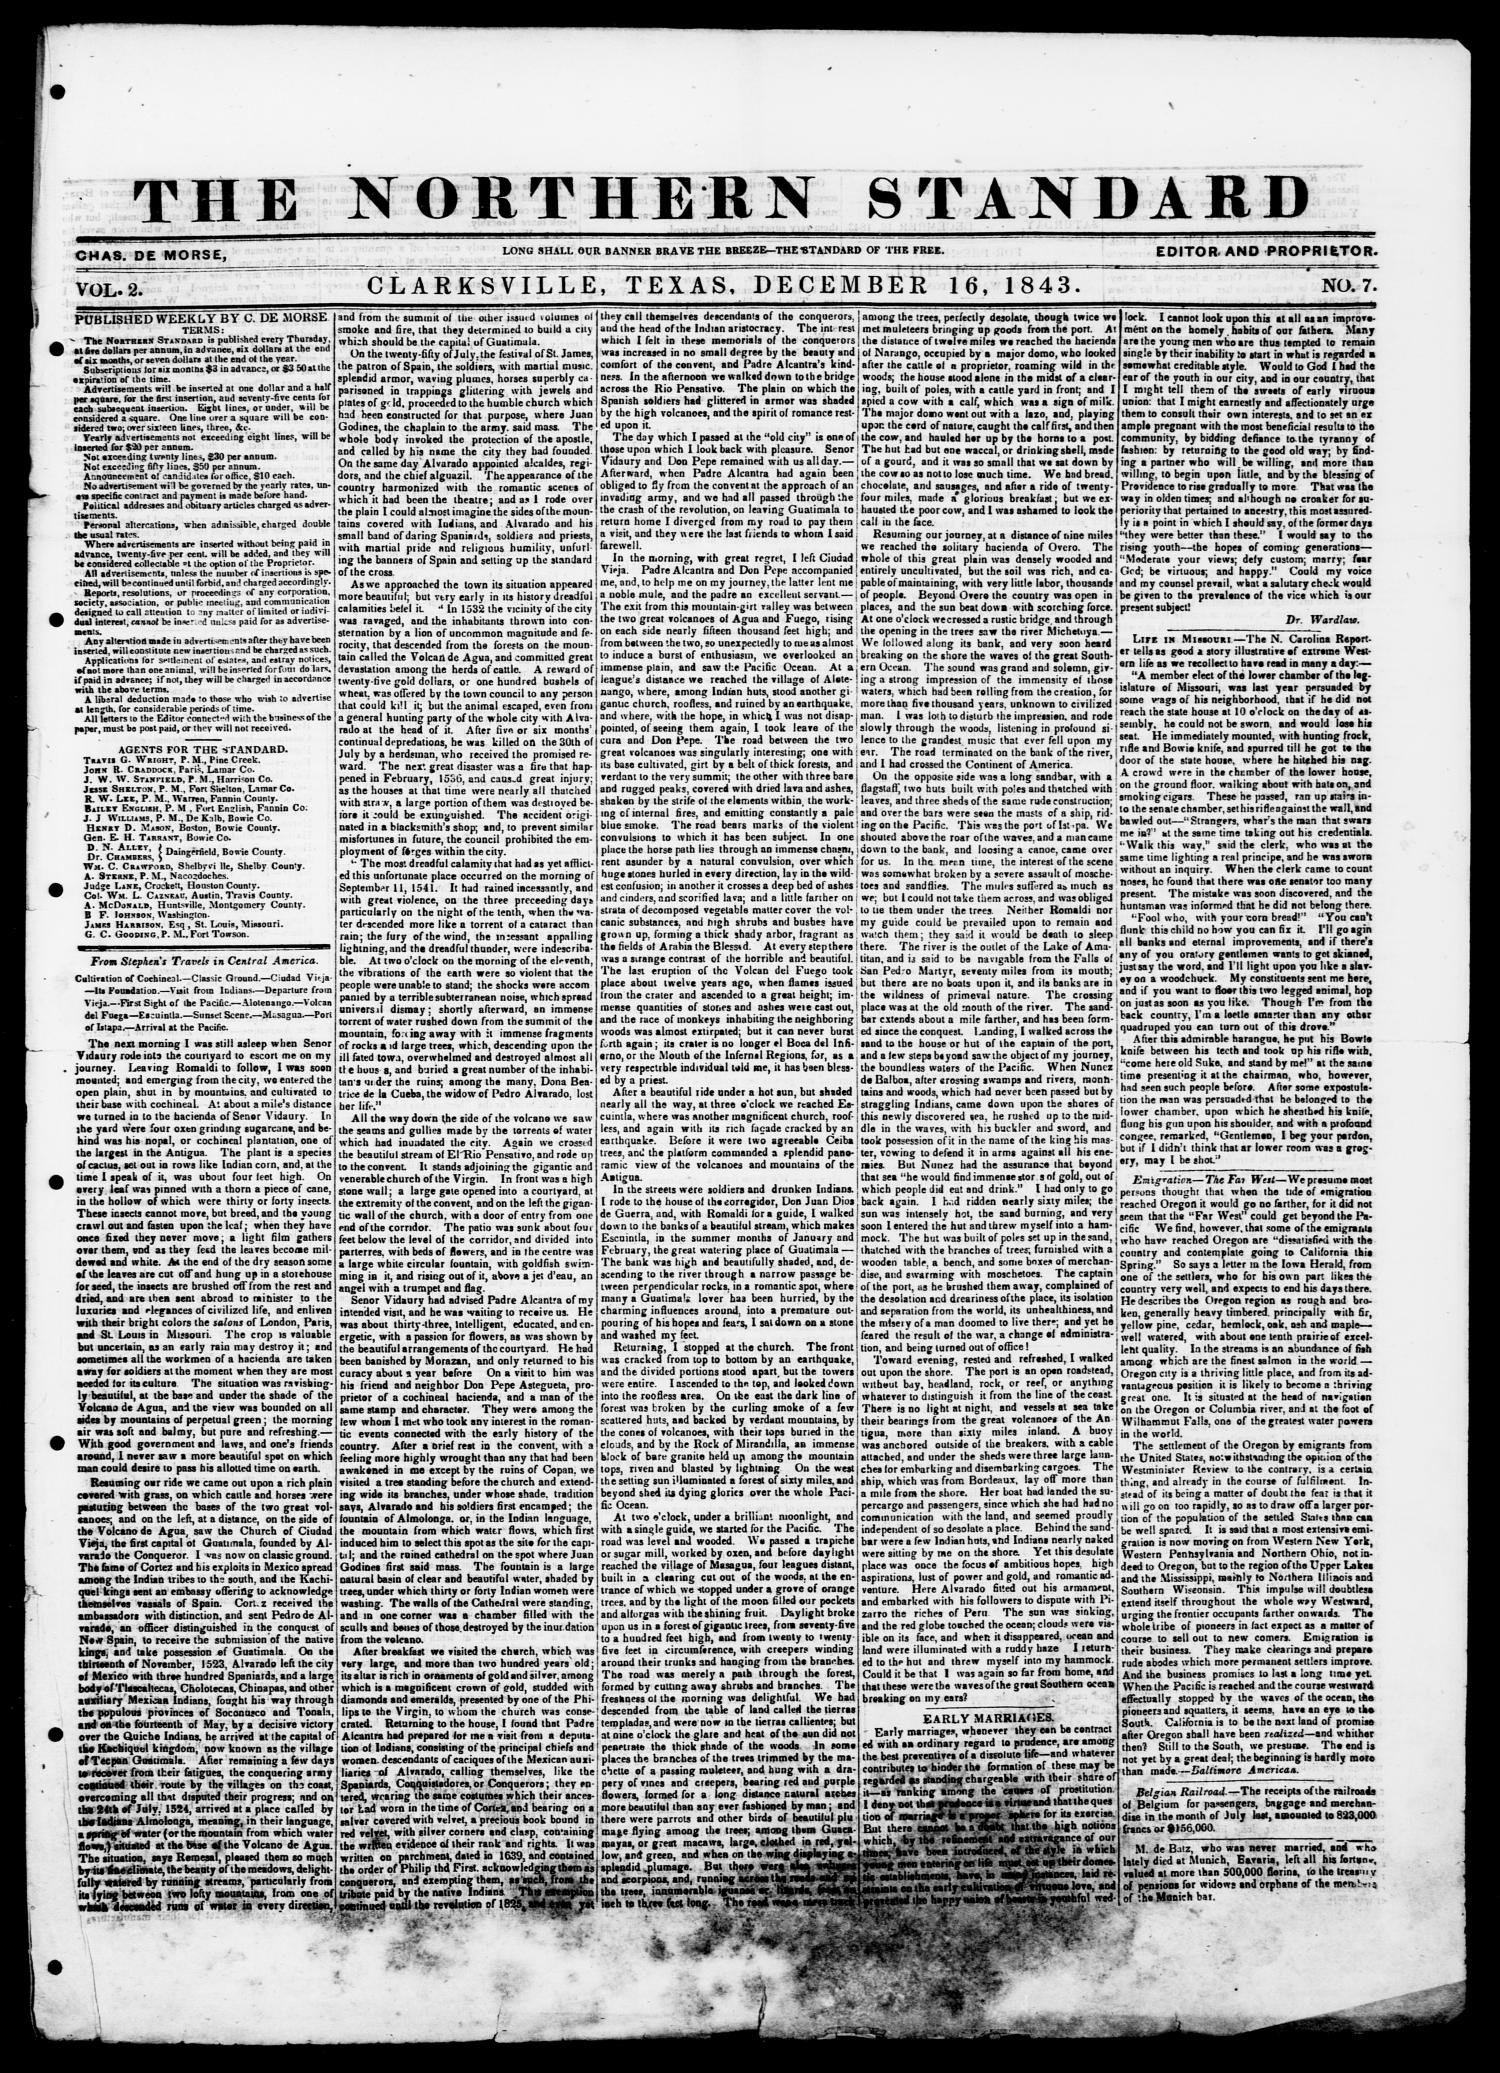 The Northern Standard. (Clarksville, Tex.), Vol. 2, No. 7, Ed. 1, Saturday, December 16, 1843
                                                
                                                    [Sequence #]: 1 of 4
                                                